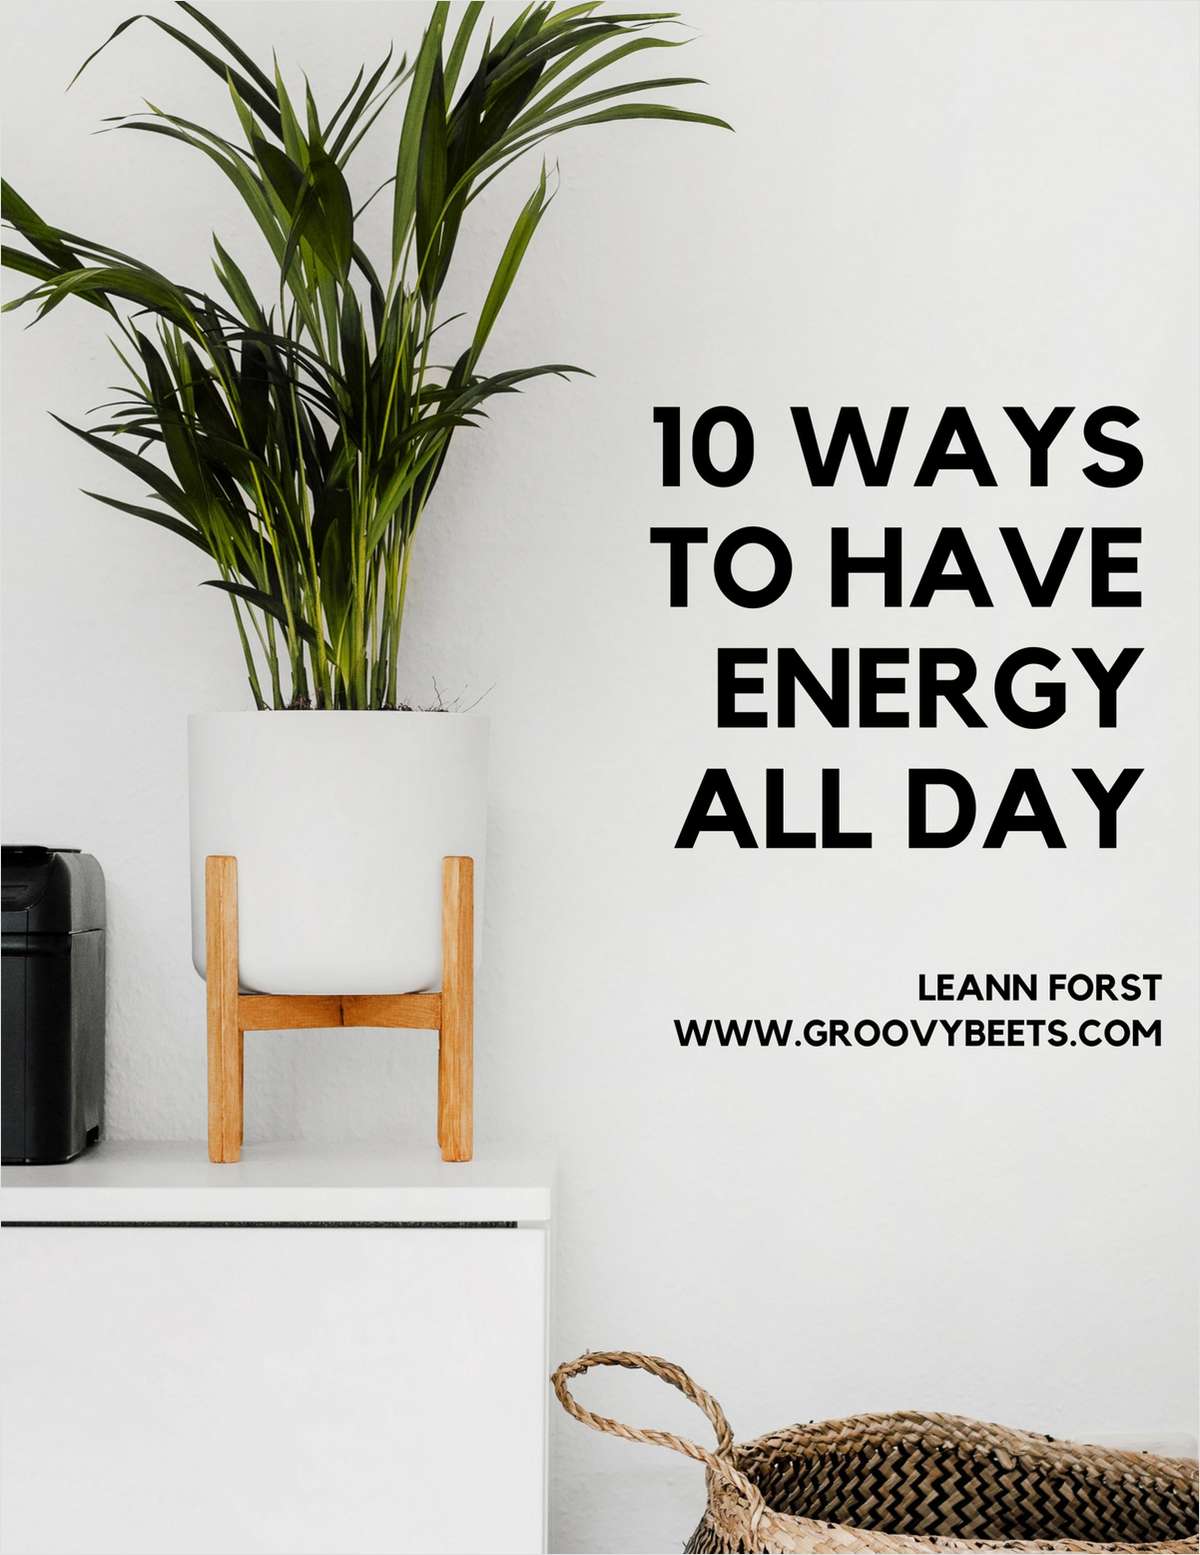 10 Ways to Have Energy All Day